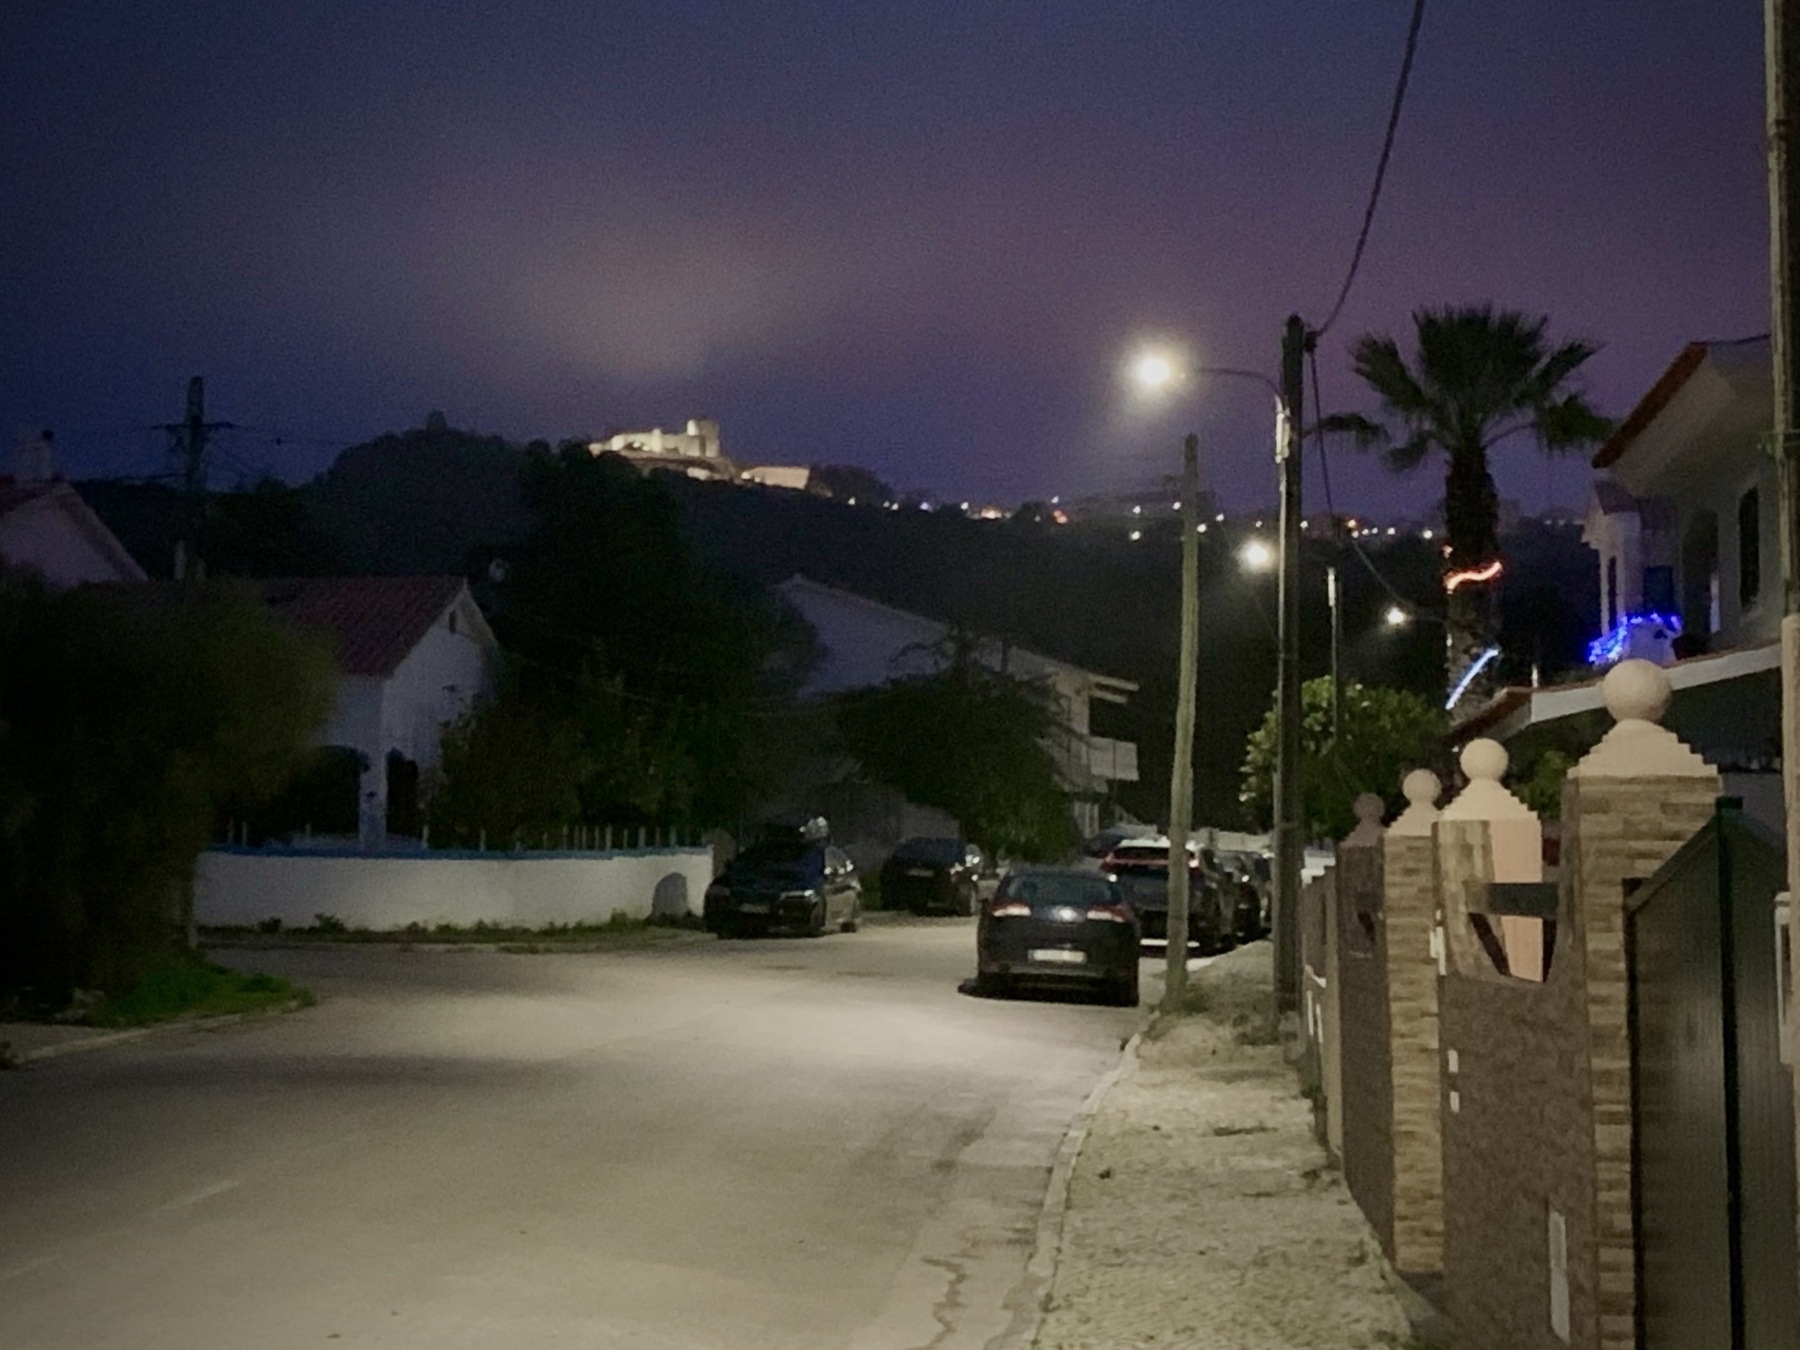 View of a residential street with the medieval castle of Palmela on a hill visible in the background, with lights illuminating the low clouds in the sky.